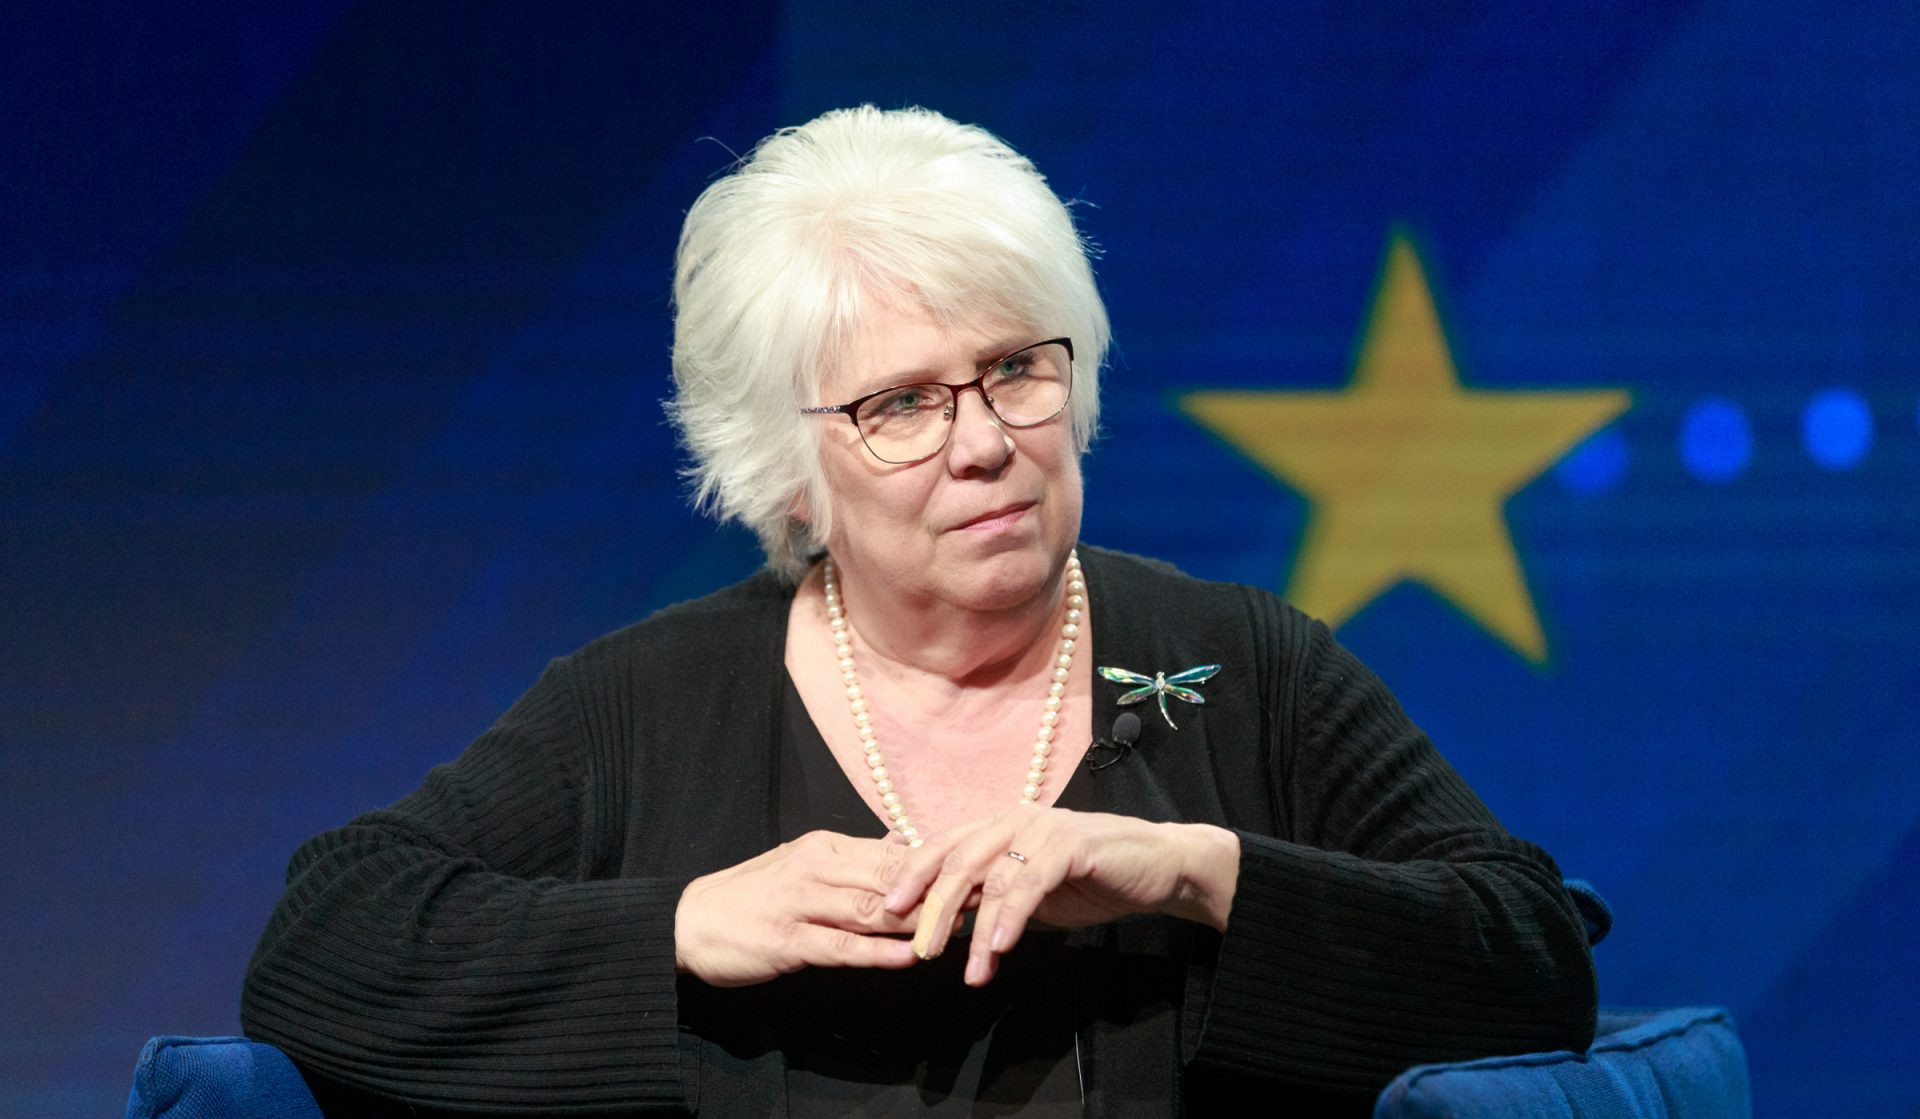 Kaljurand called for immediate end to use of force in Nagorno-Karabakh